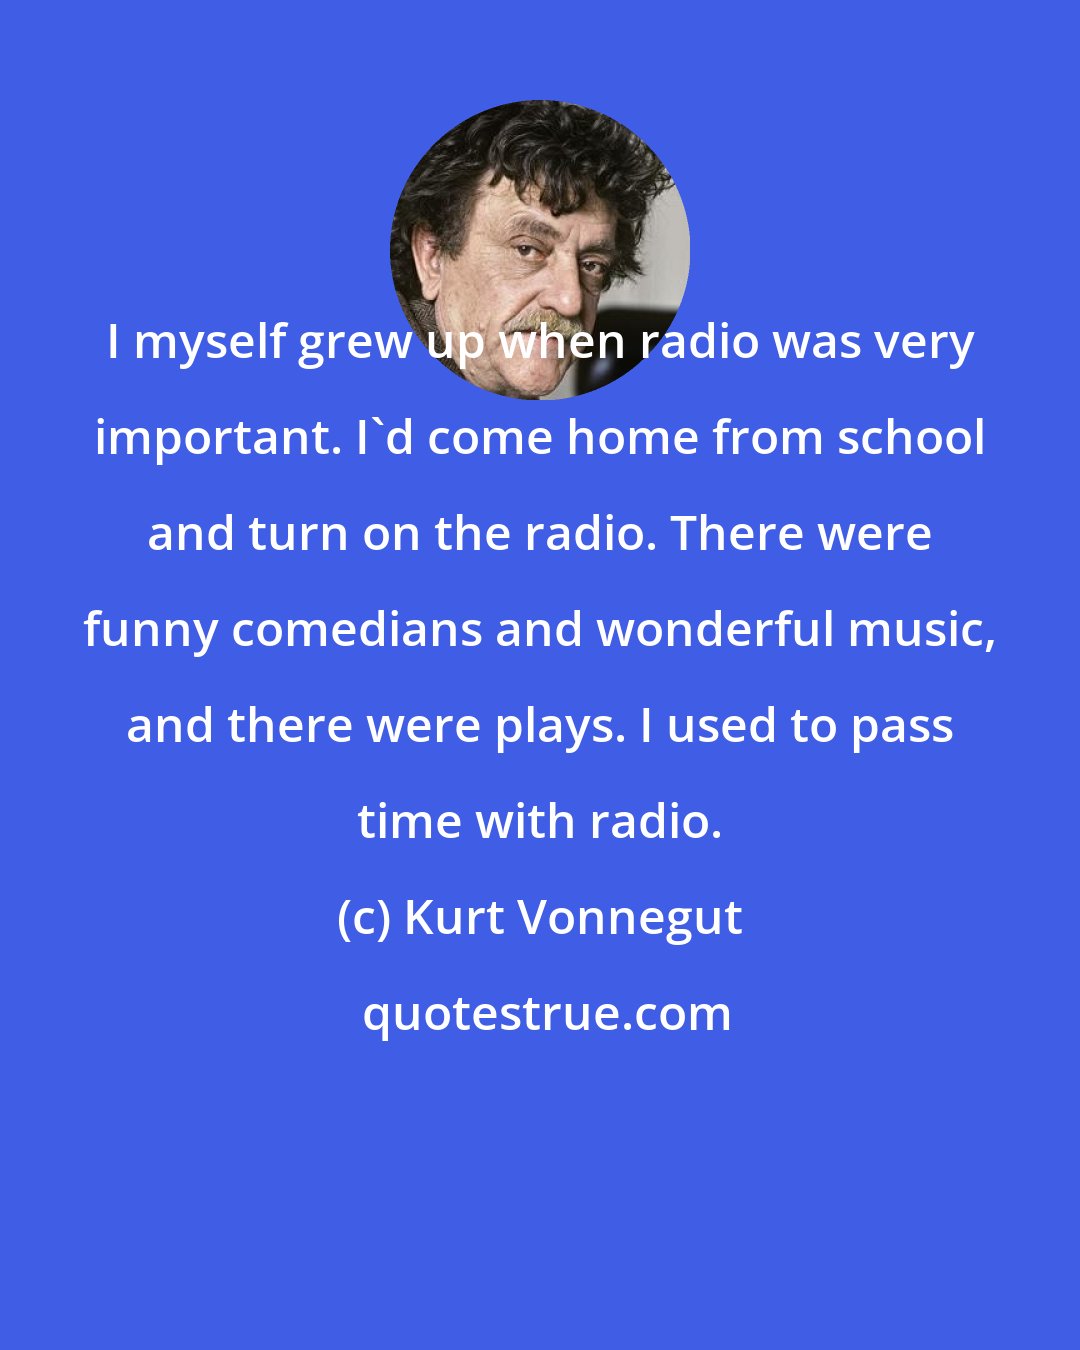 Kurt Vonnegut: I myself grew up when radio was very important. I'd come home from school and turn on the radio. There were funny comedians and wonderful music, and there were plays. I used to pass time with radio.